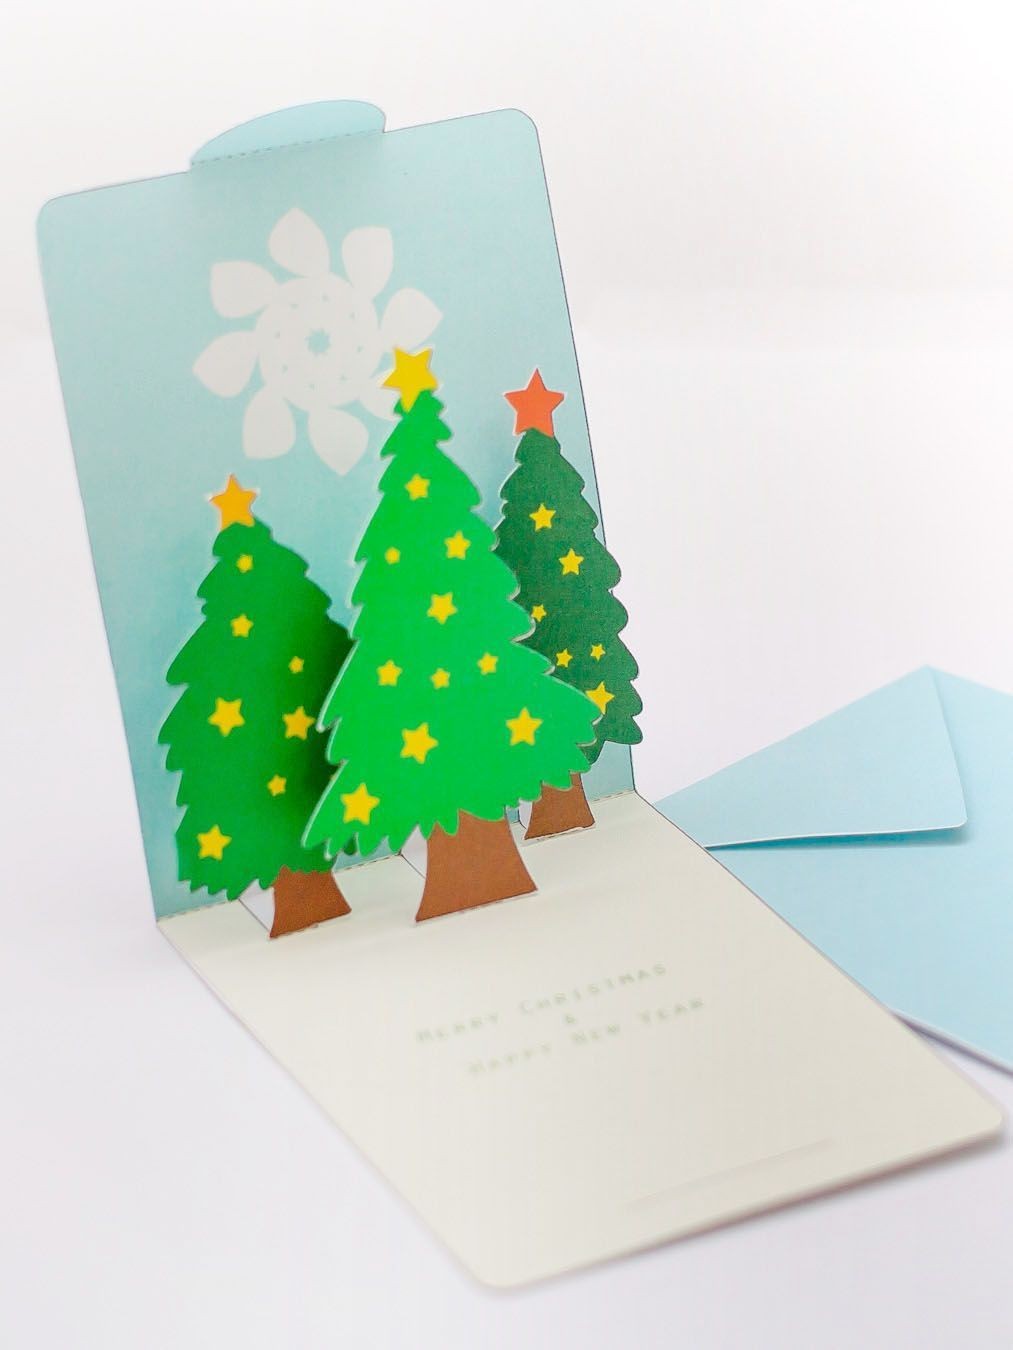 Papercraft Christmas Cards Free Pop Up Card Template Mookeep origami and Papercraft